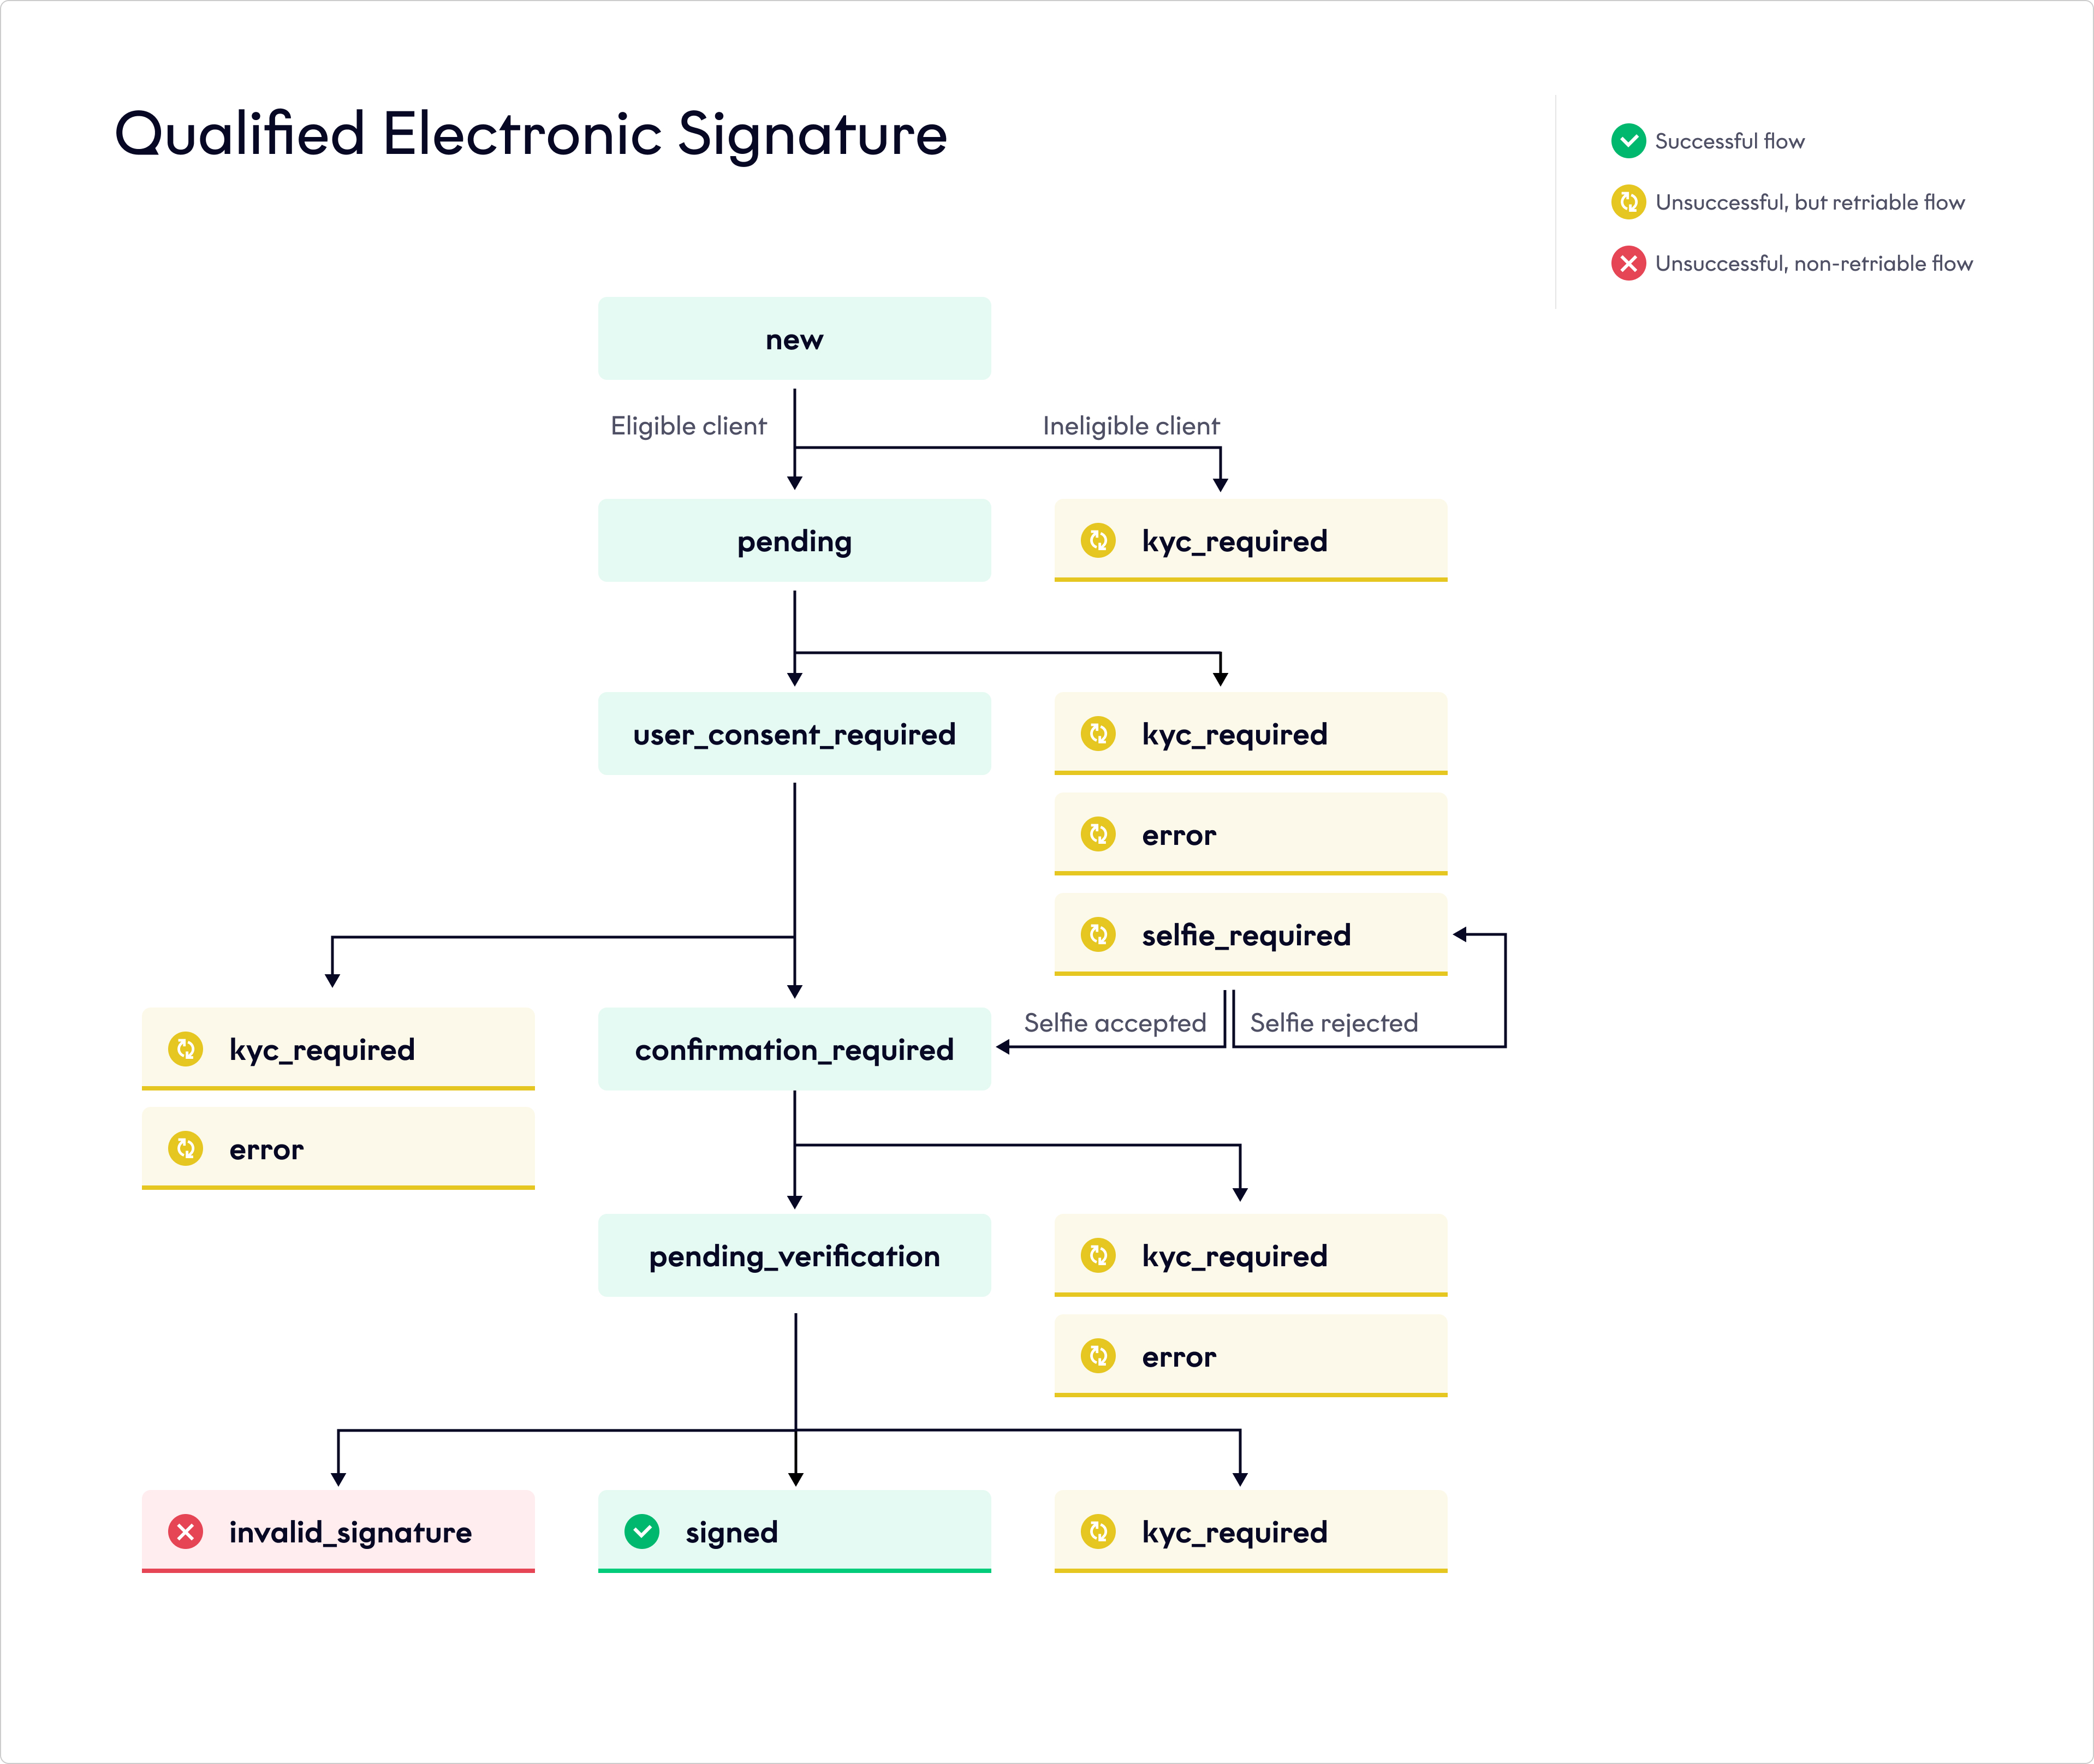 Qualified Electronic Signature